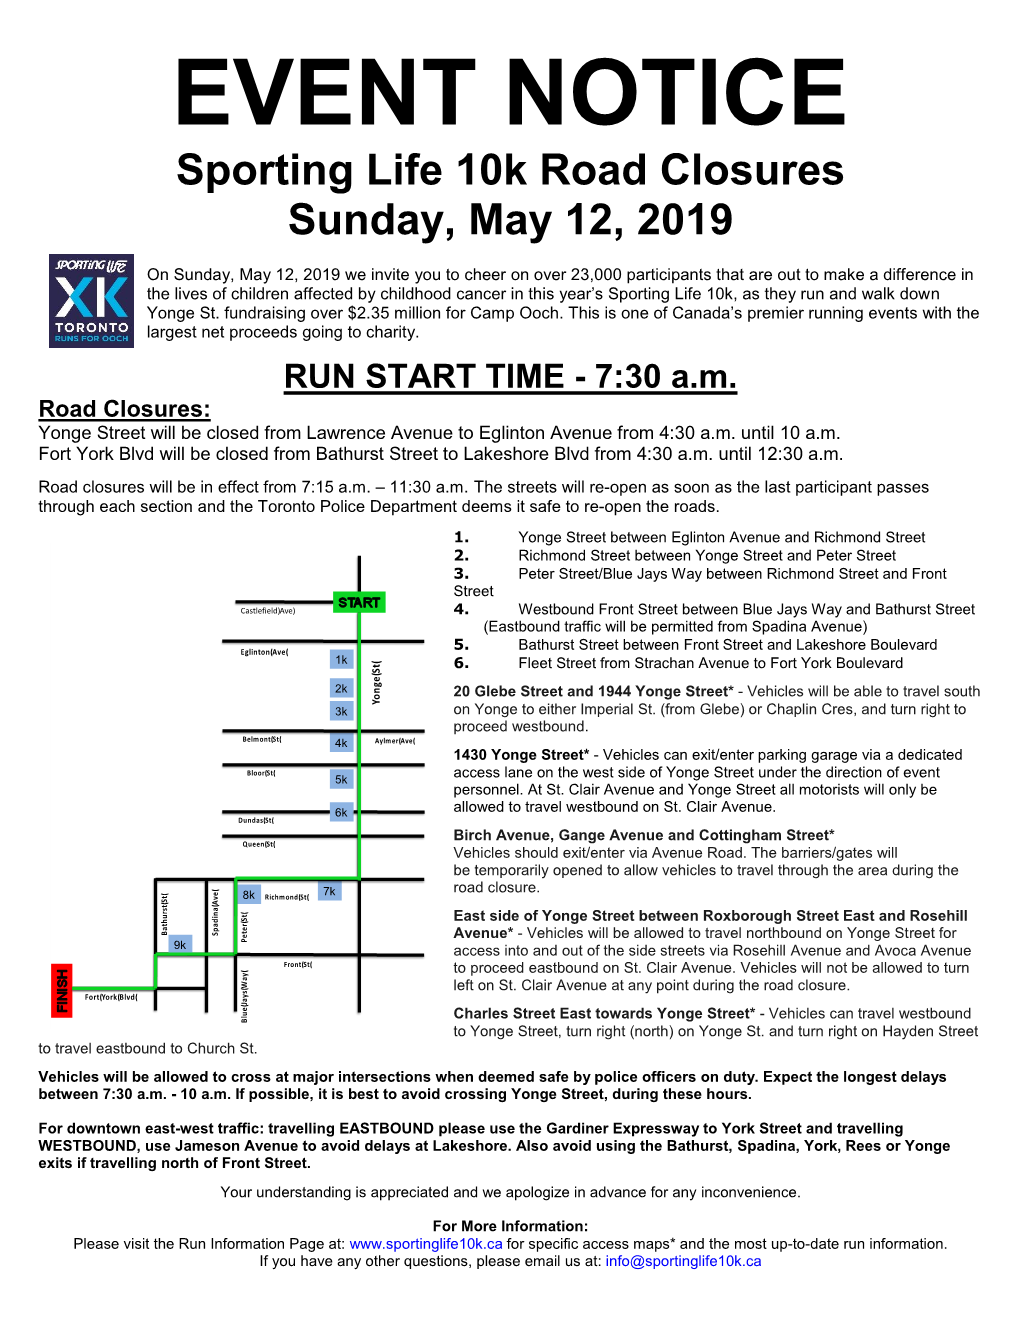 EVENT NOTICE Sporting Life 10K Road Closures Sunday, May 12, 2019